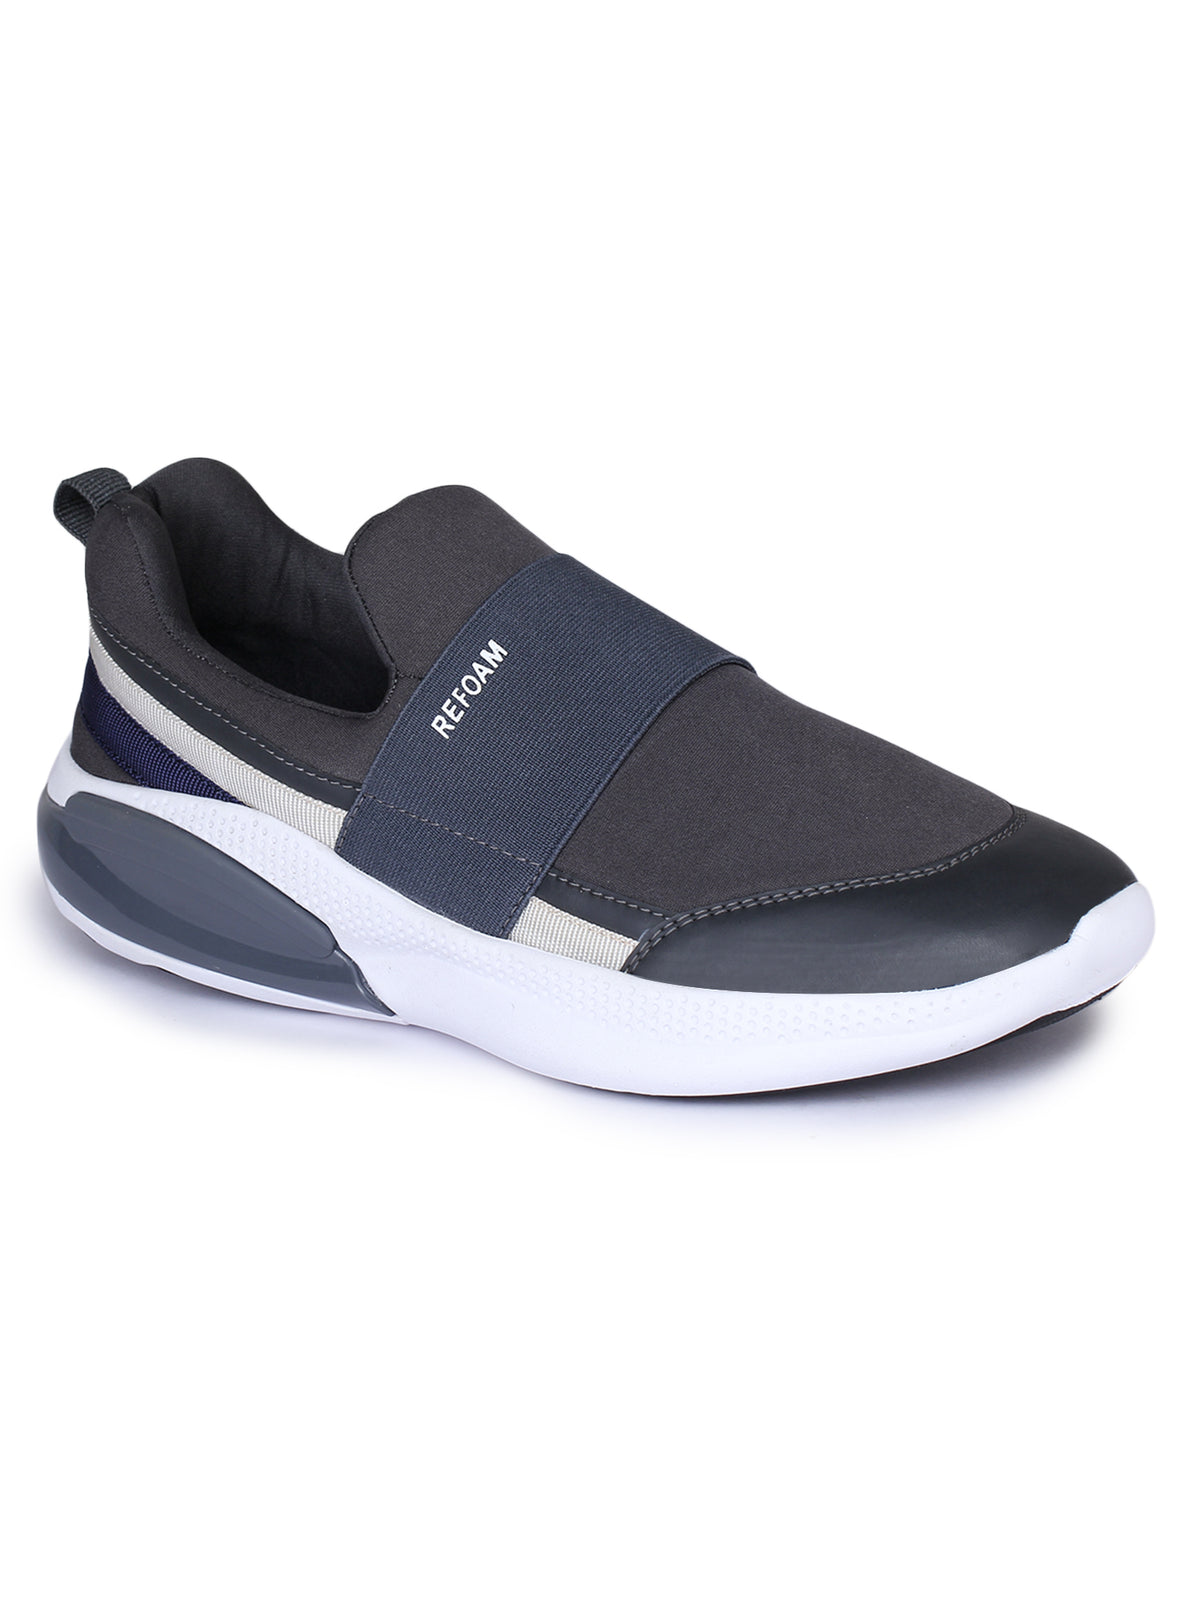 Grey Solid Mesh Slip On Lifestyle Casual Shoes For Men